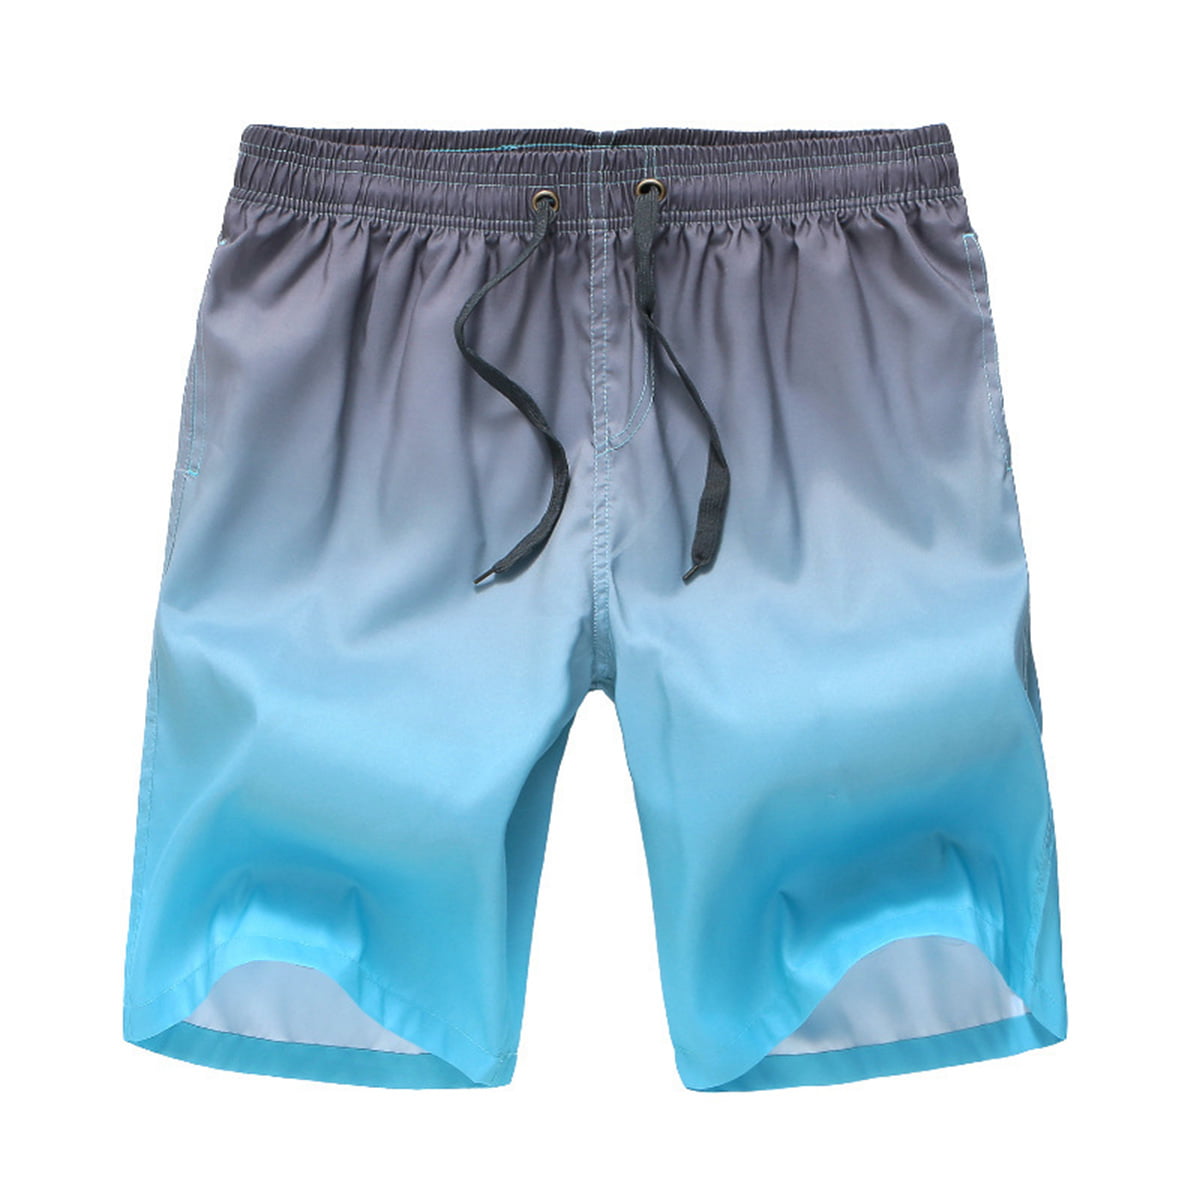 Men Swimwear Quick Dry Lined with Pockets drawstring Summer Holiday Beach Shorts 